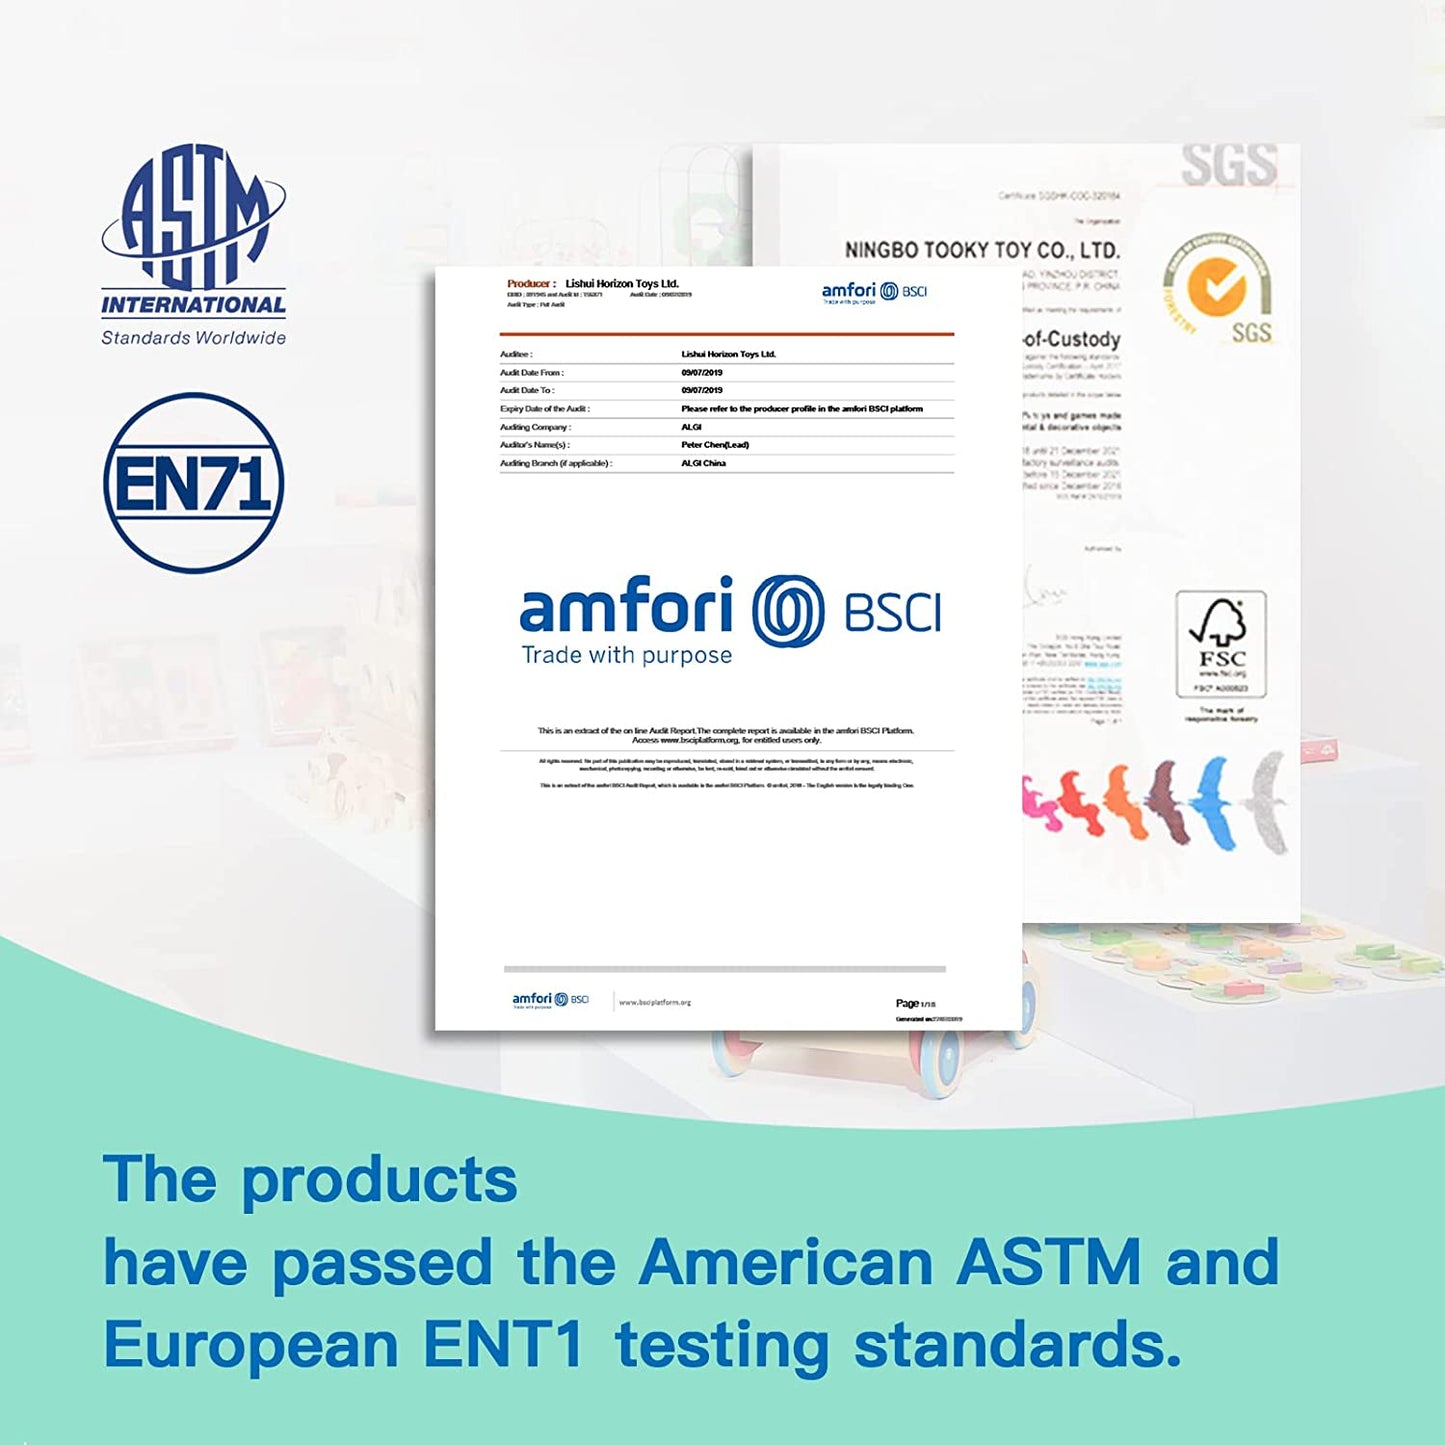 AMERICAN ASTM AND EUROPEAN ENT1